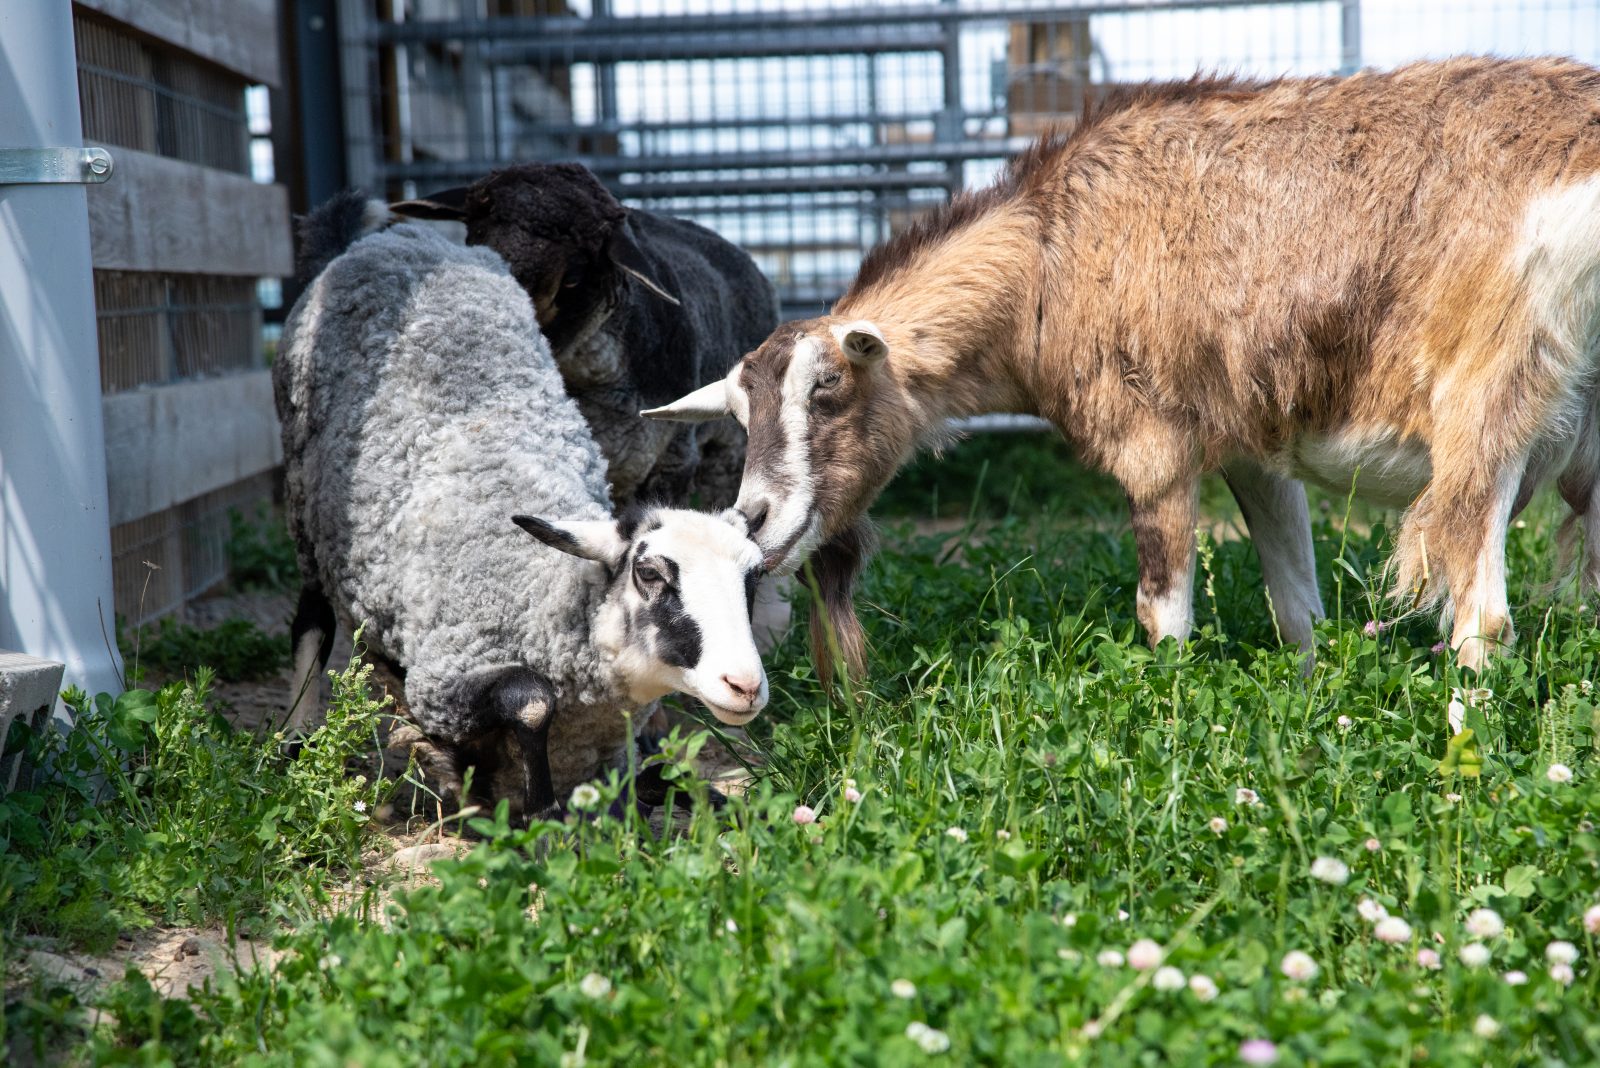 Appa Sheep (left) and Clarabell Goat (right)